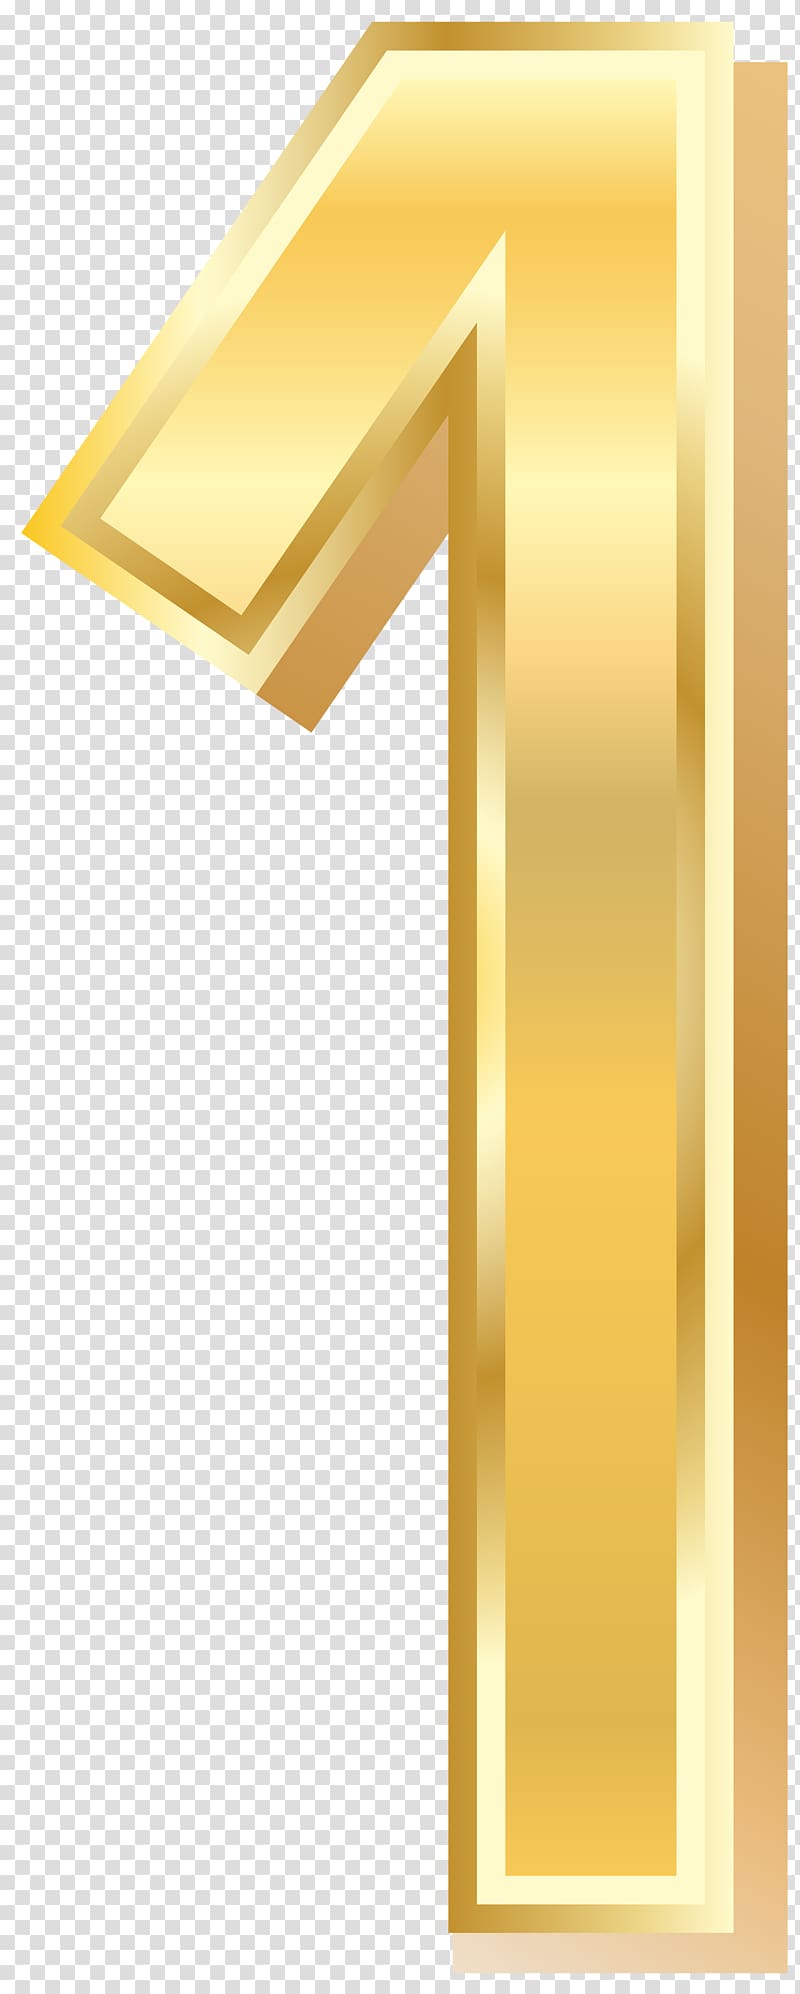 1 number screenshot, Numerical digit Number Decimal Numeral system, Gold Style Number One transparent background PNG clipart